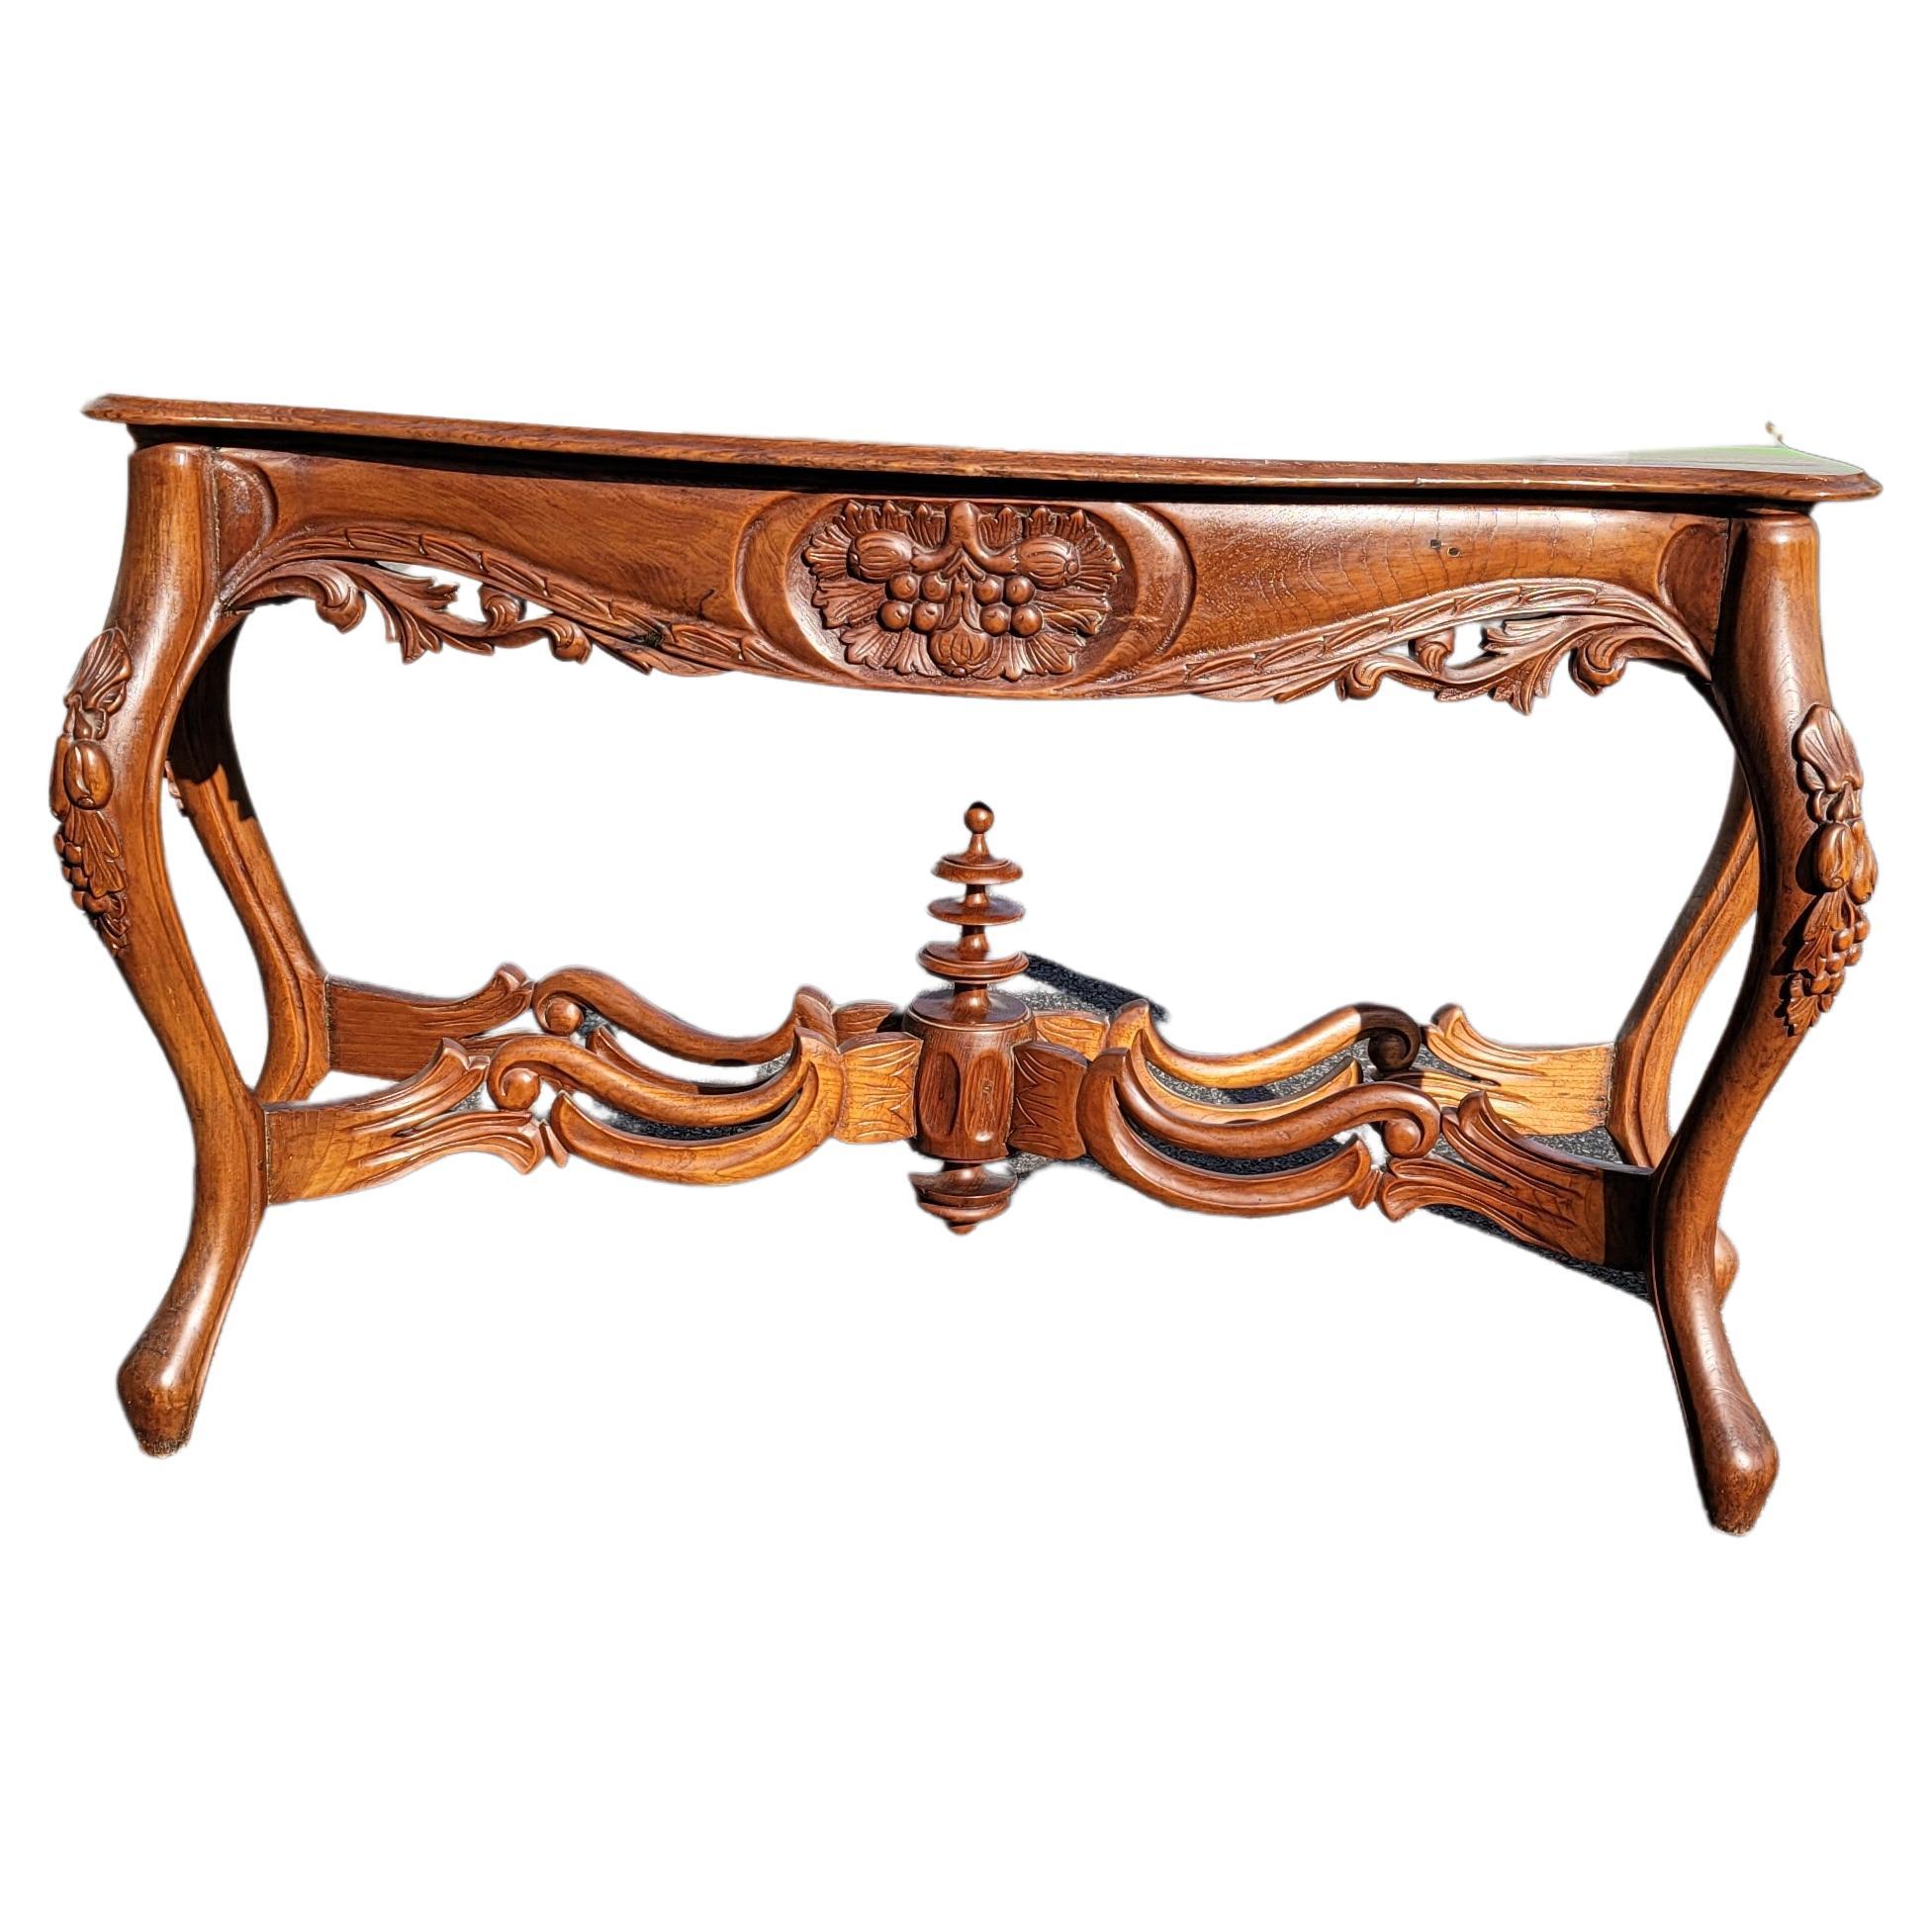 A French Rococo Style Carved Mahogany Serpentine Console Table with beautiful carvings of fruit , leaves and branches with beautiful carved stretcher center topped by a carved crown underneath in Very good vintage condition.  Measures 55